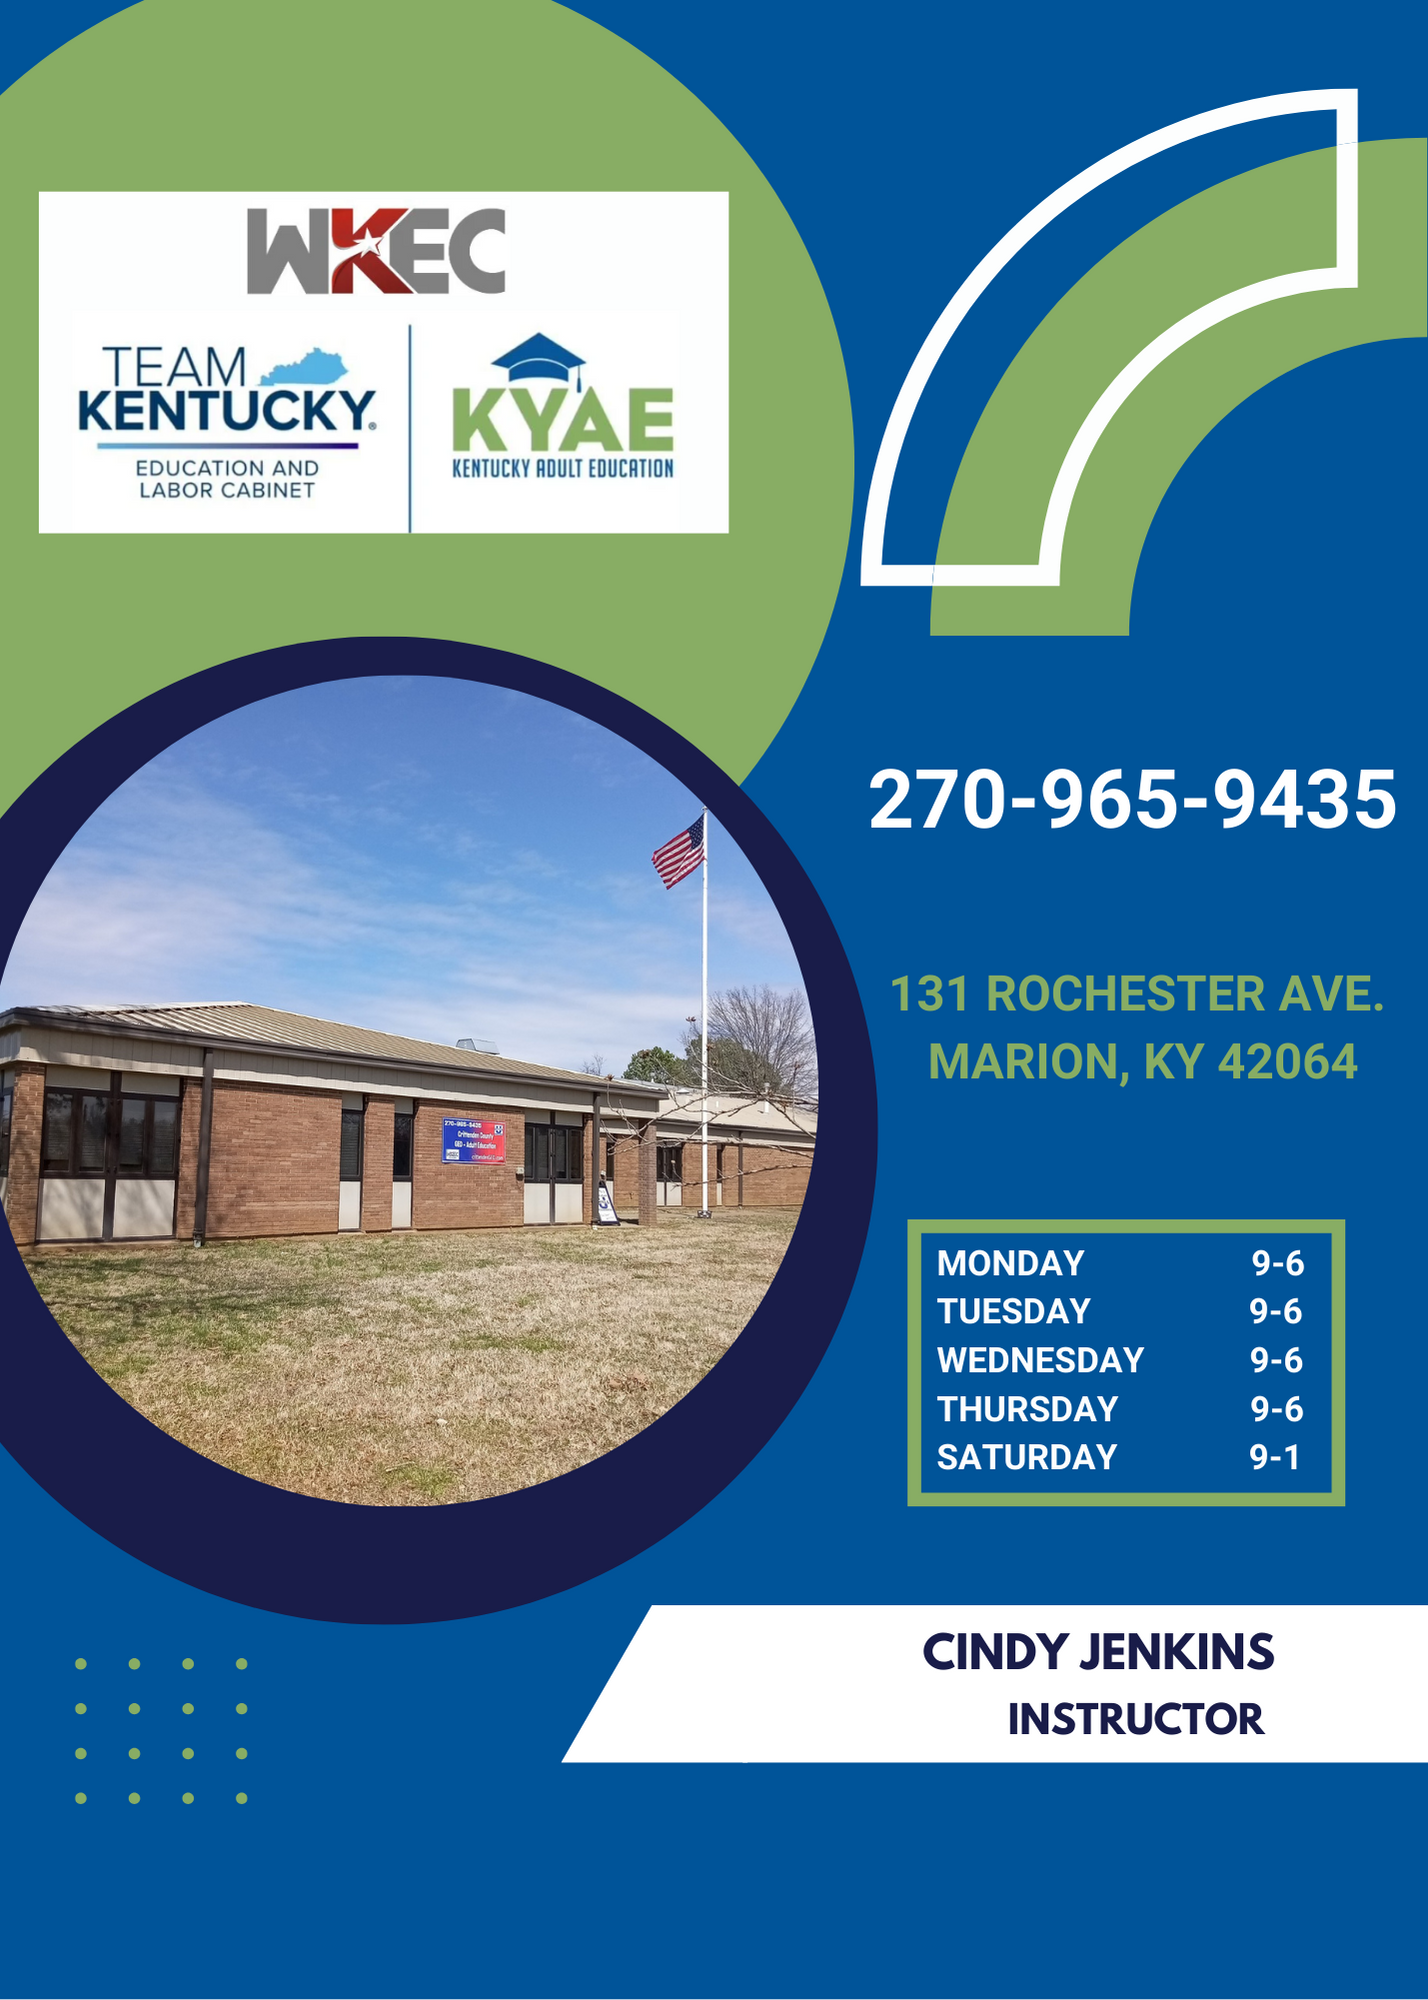 Crittenden County Adult Education hours and address